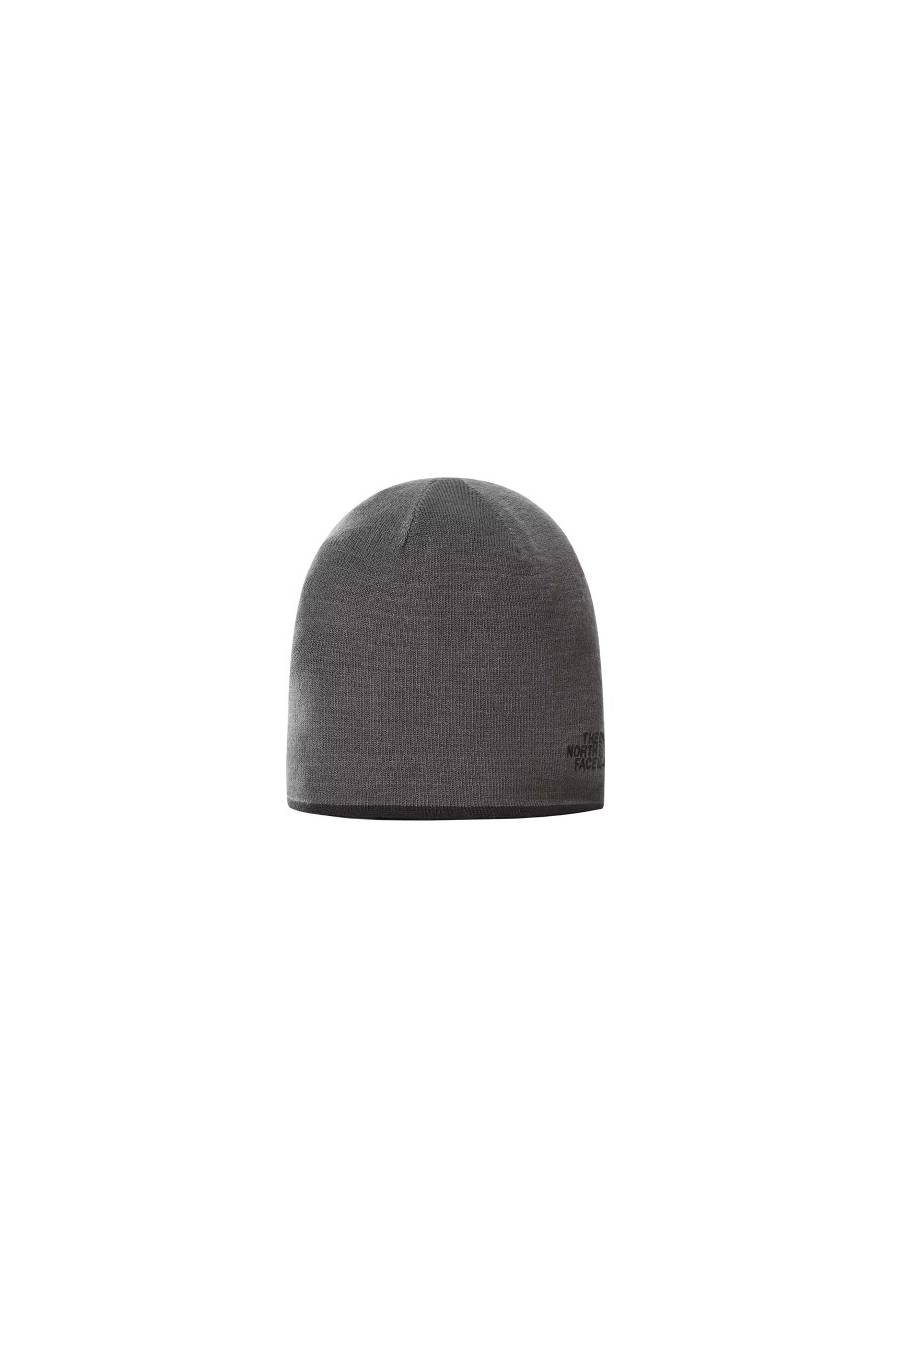 Gorro Reversible The North Face Banner NF00AKNDKT01